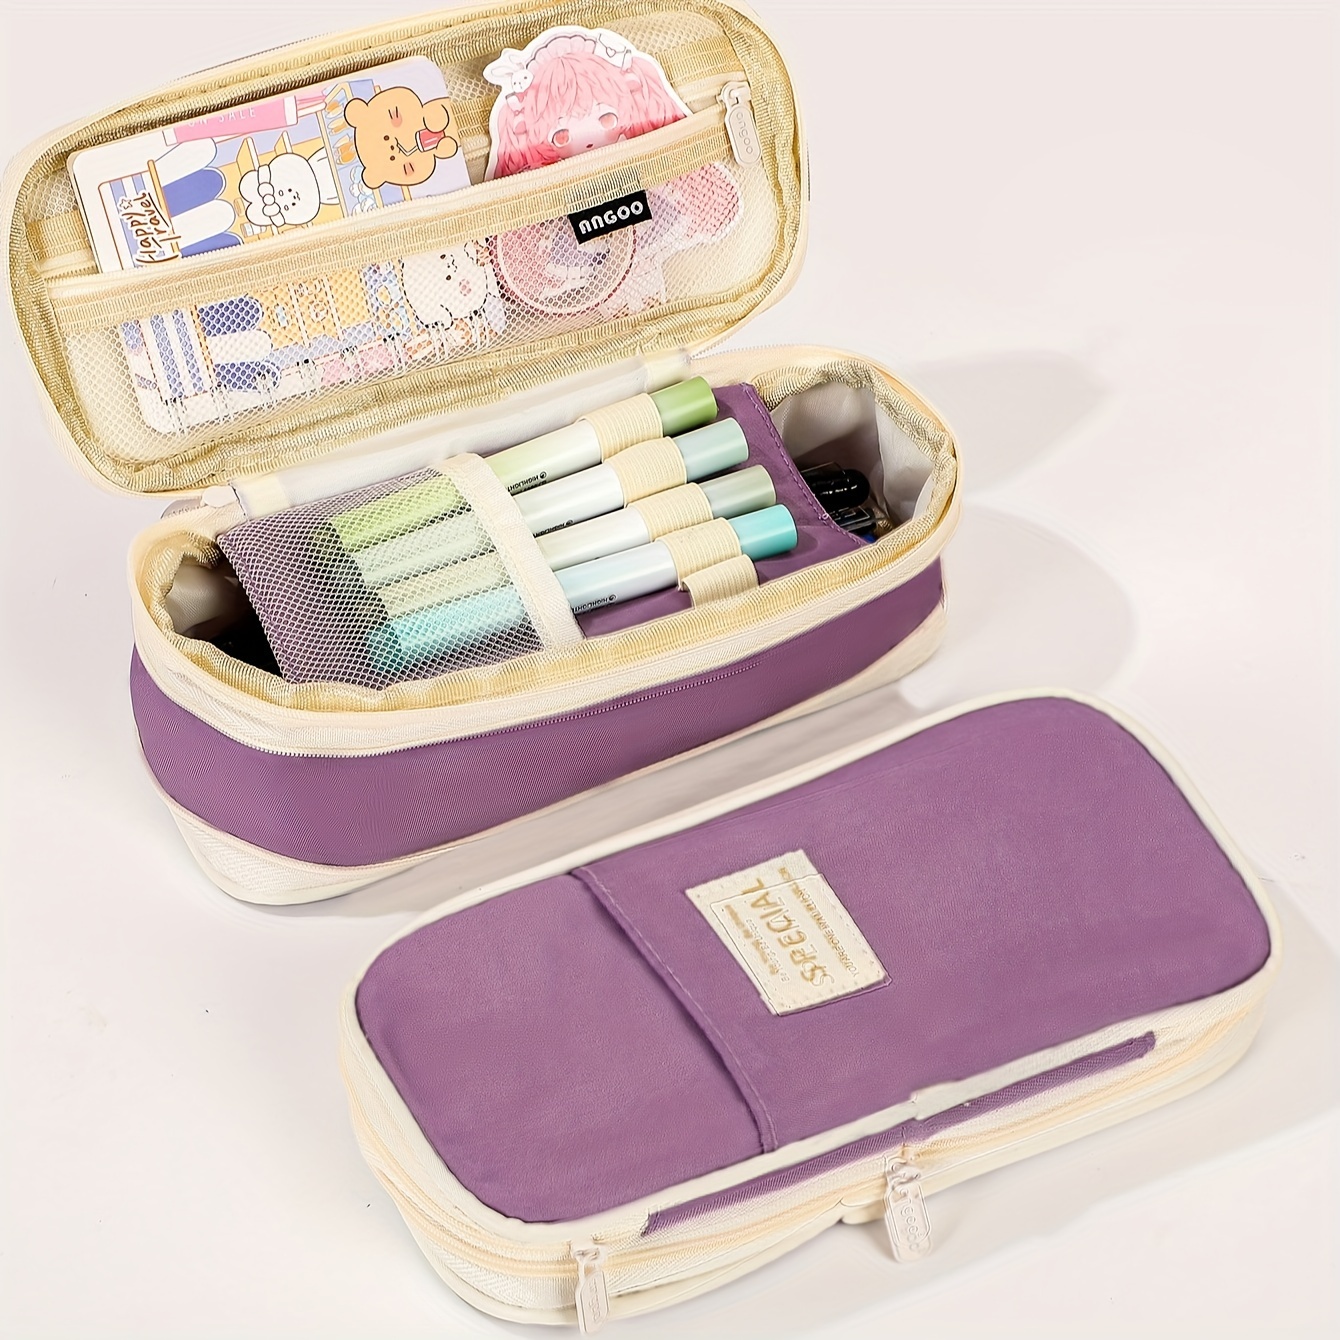 Xmmswdla Preppy Pencil Case Purple Pencil Caseslarge-Capacity Pencil Case Macaron Color Matching Can Be Transformed Into An Upgraded Pencil Case